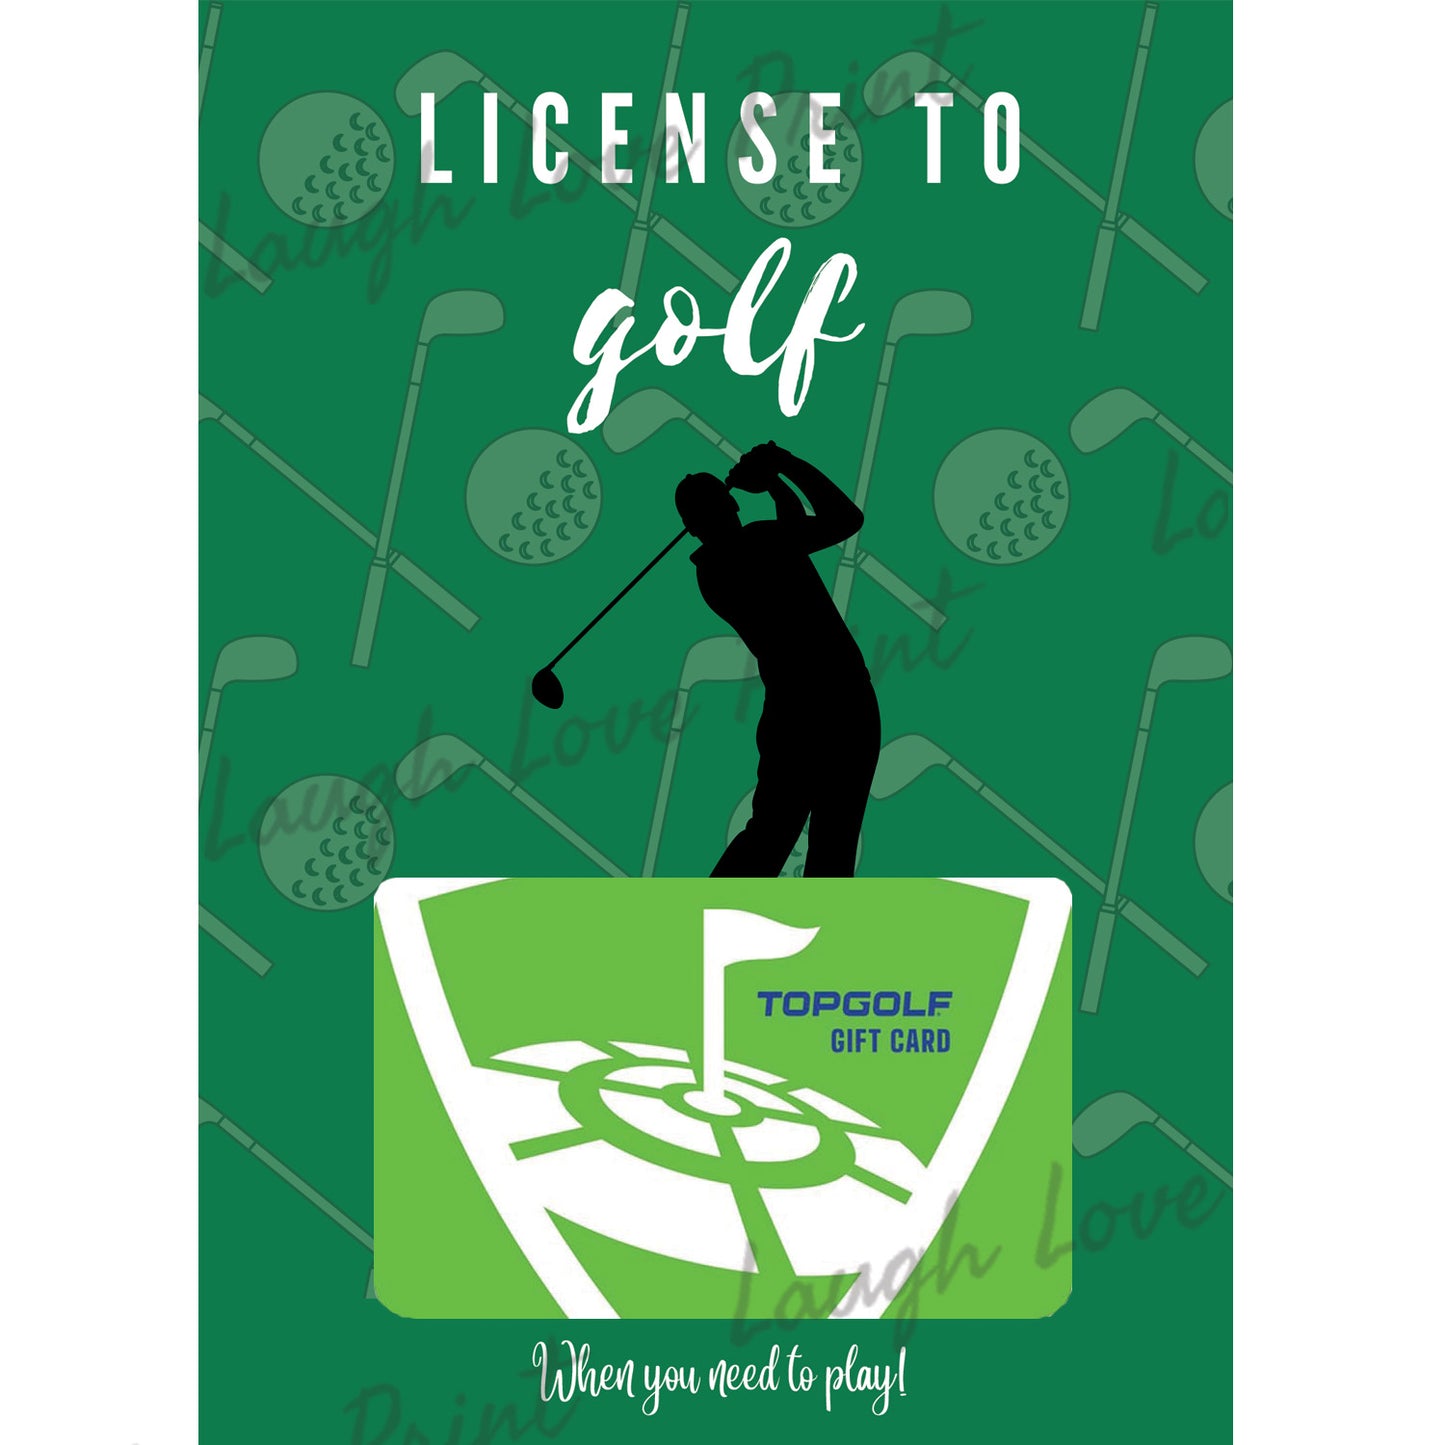 Top Golf GIft Card Page